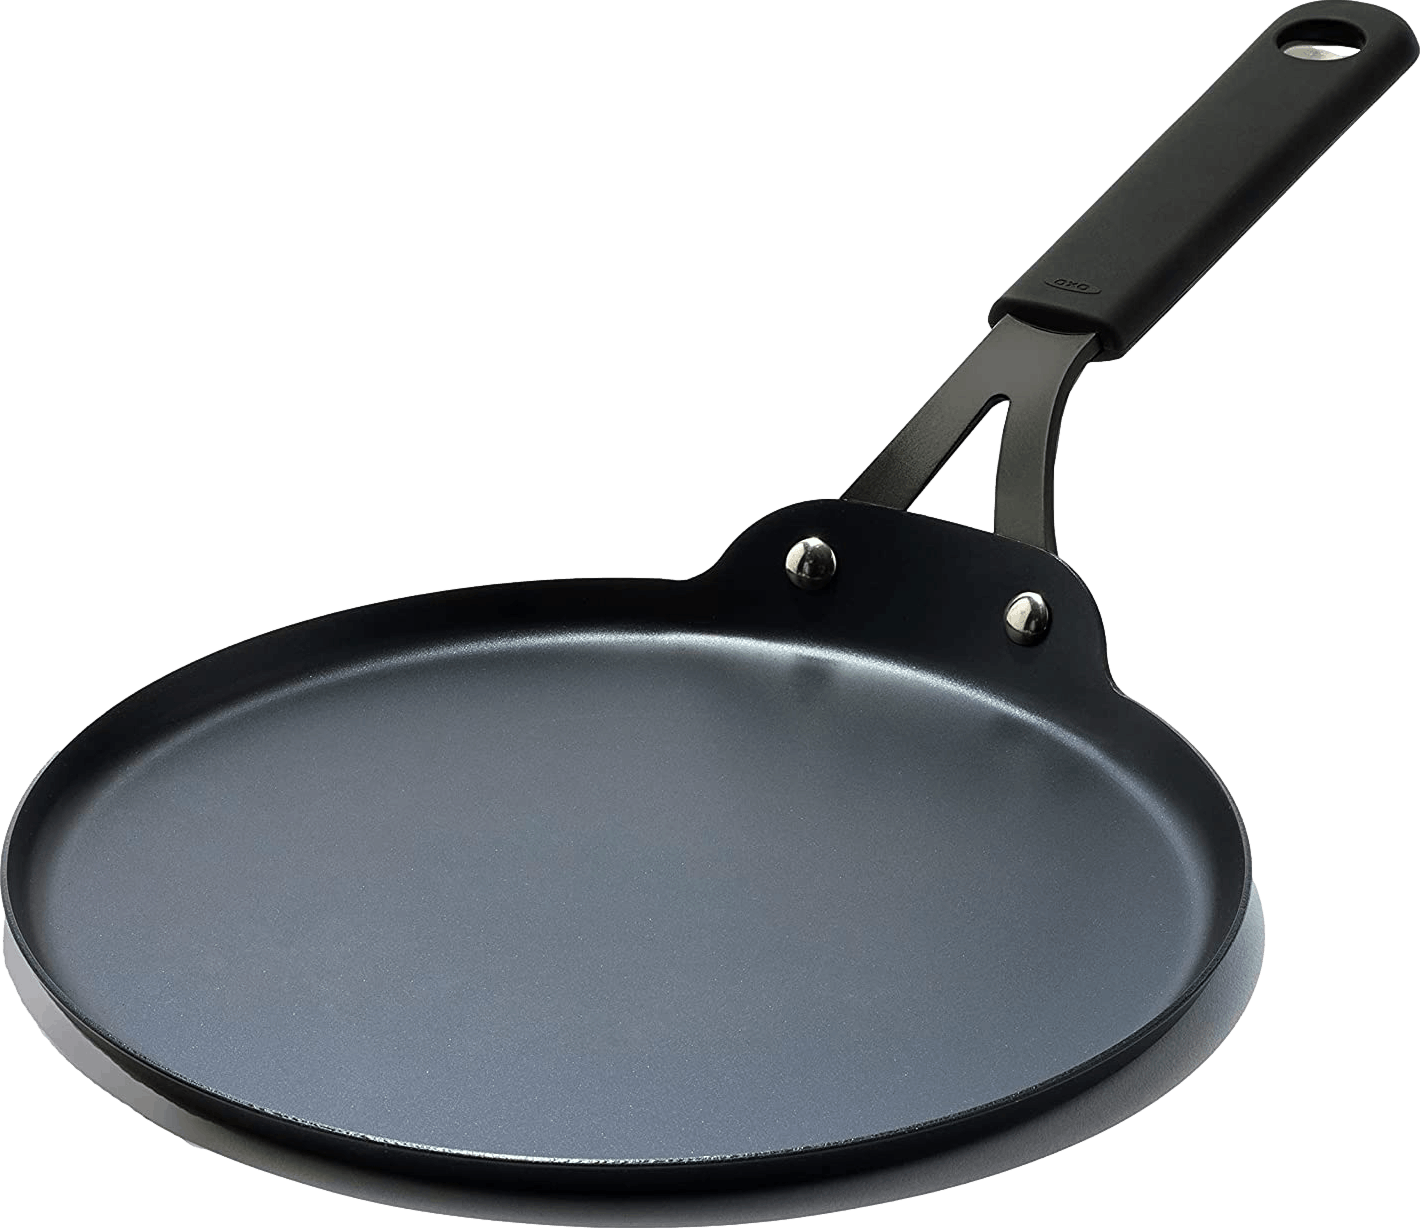 OXO Obsidian Carbon Steel 10" Crepe Pan with Silicone Sleeve Black